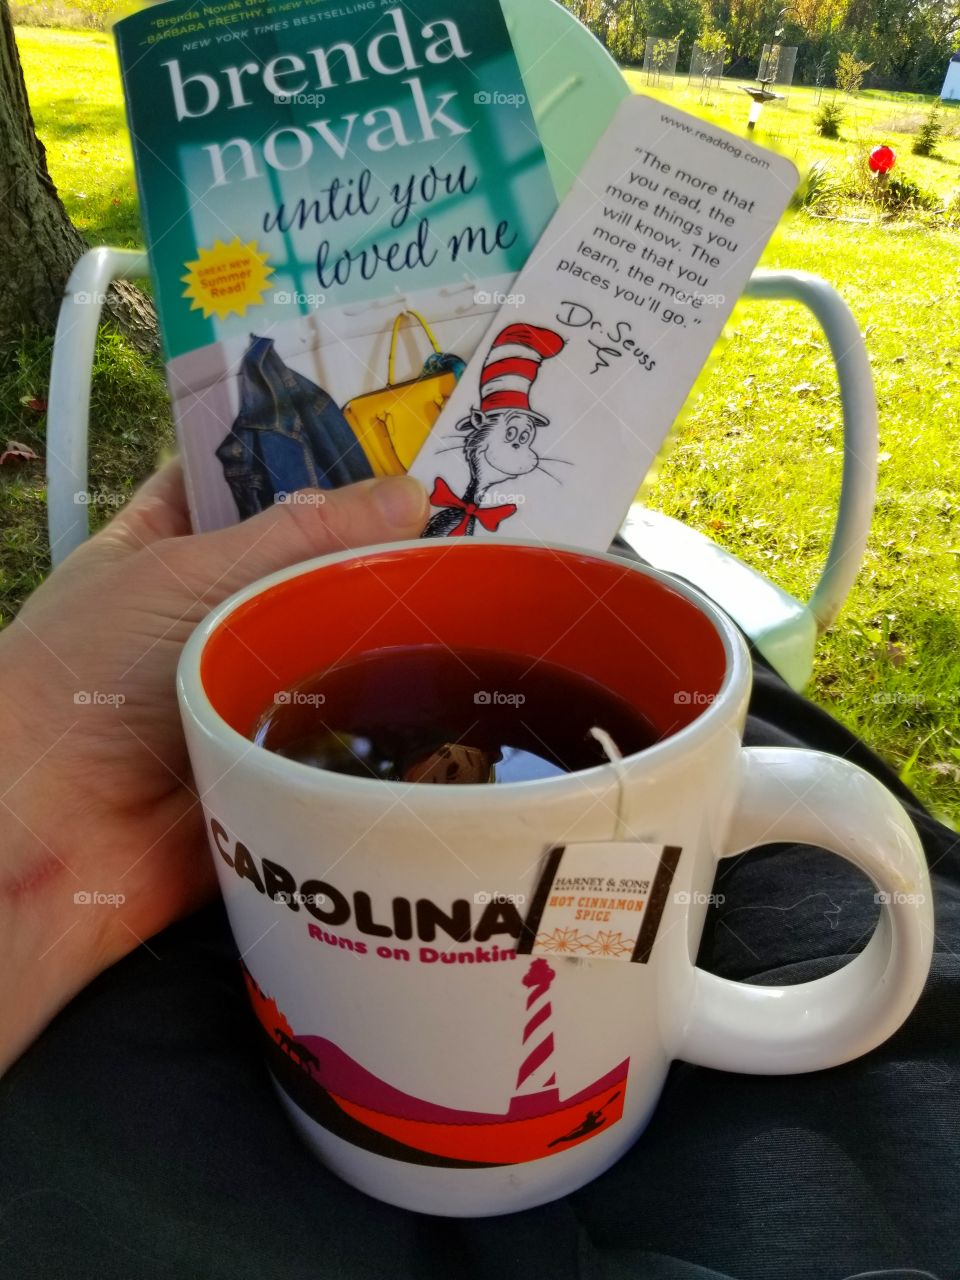 Next read, Brenda Novak's Silver Springs Novel, Until You Loved Me with a cup of Harney & Sons Hot Cinnamon Spice tea in my North Carolina Runs On Dunkin' cup.